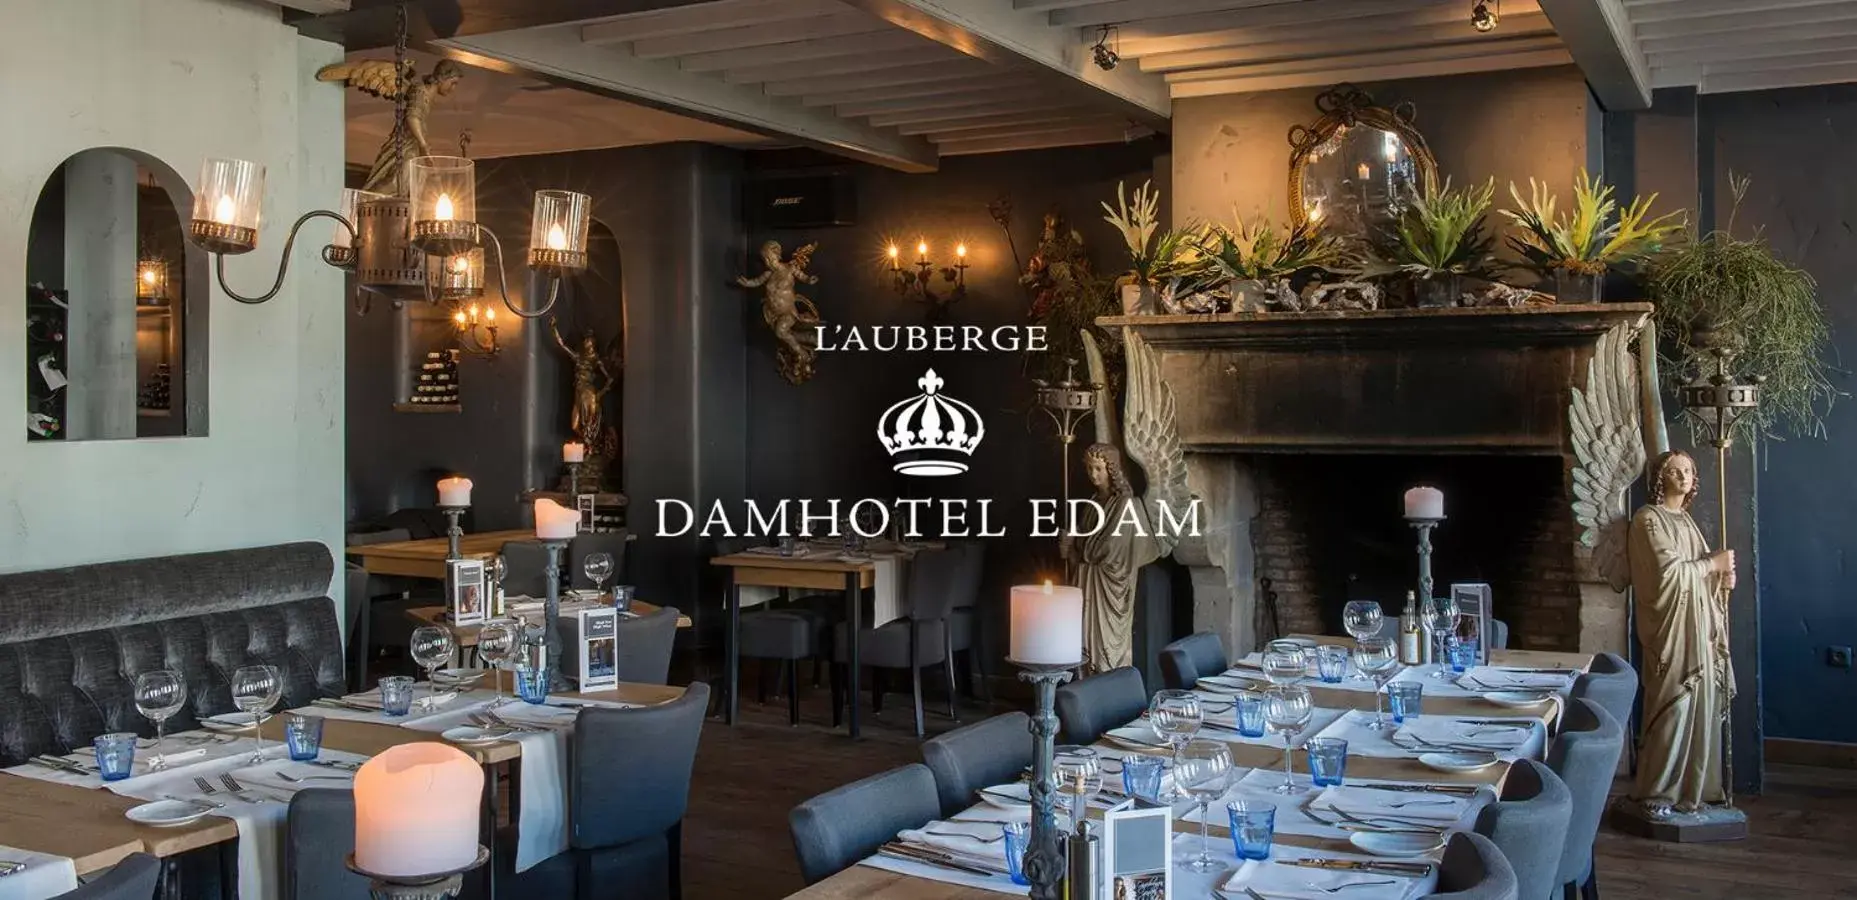 Property logo or sign, Restaurant/Places to Eat in l'Auberge Damhotel